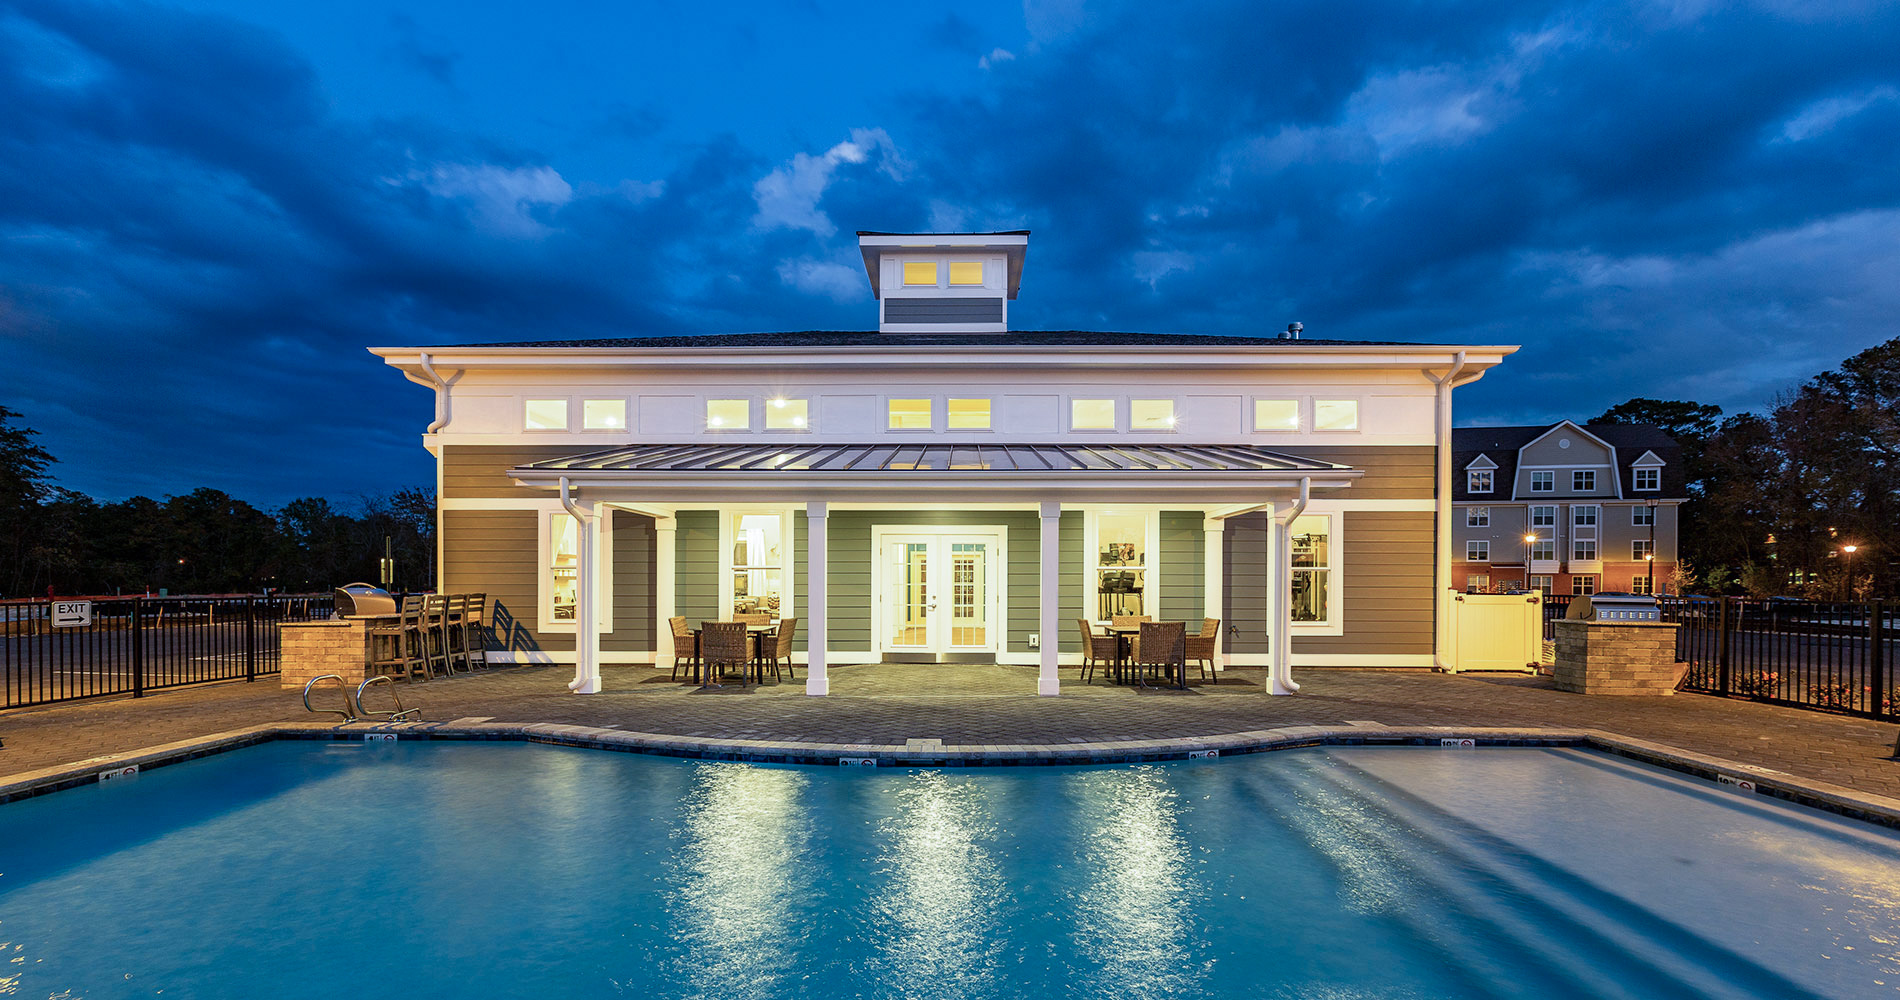 The Westport Apartments Clubhouse and Pool Area